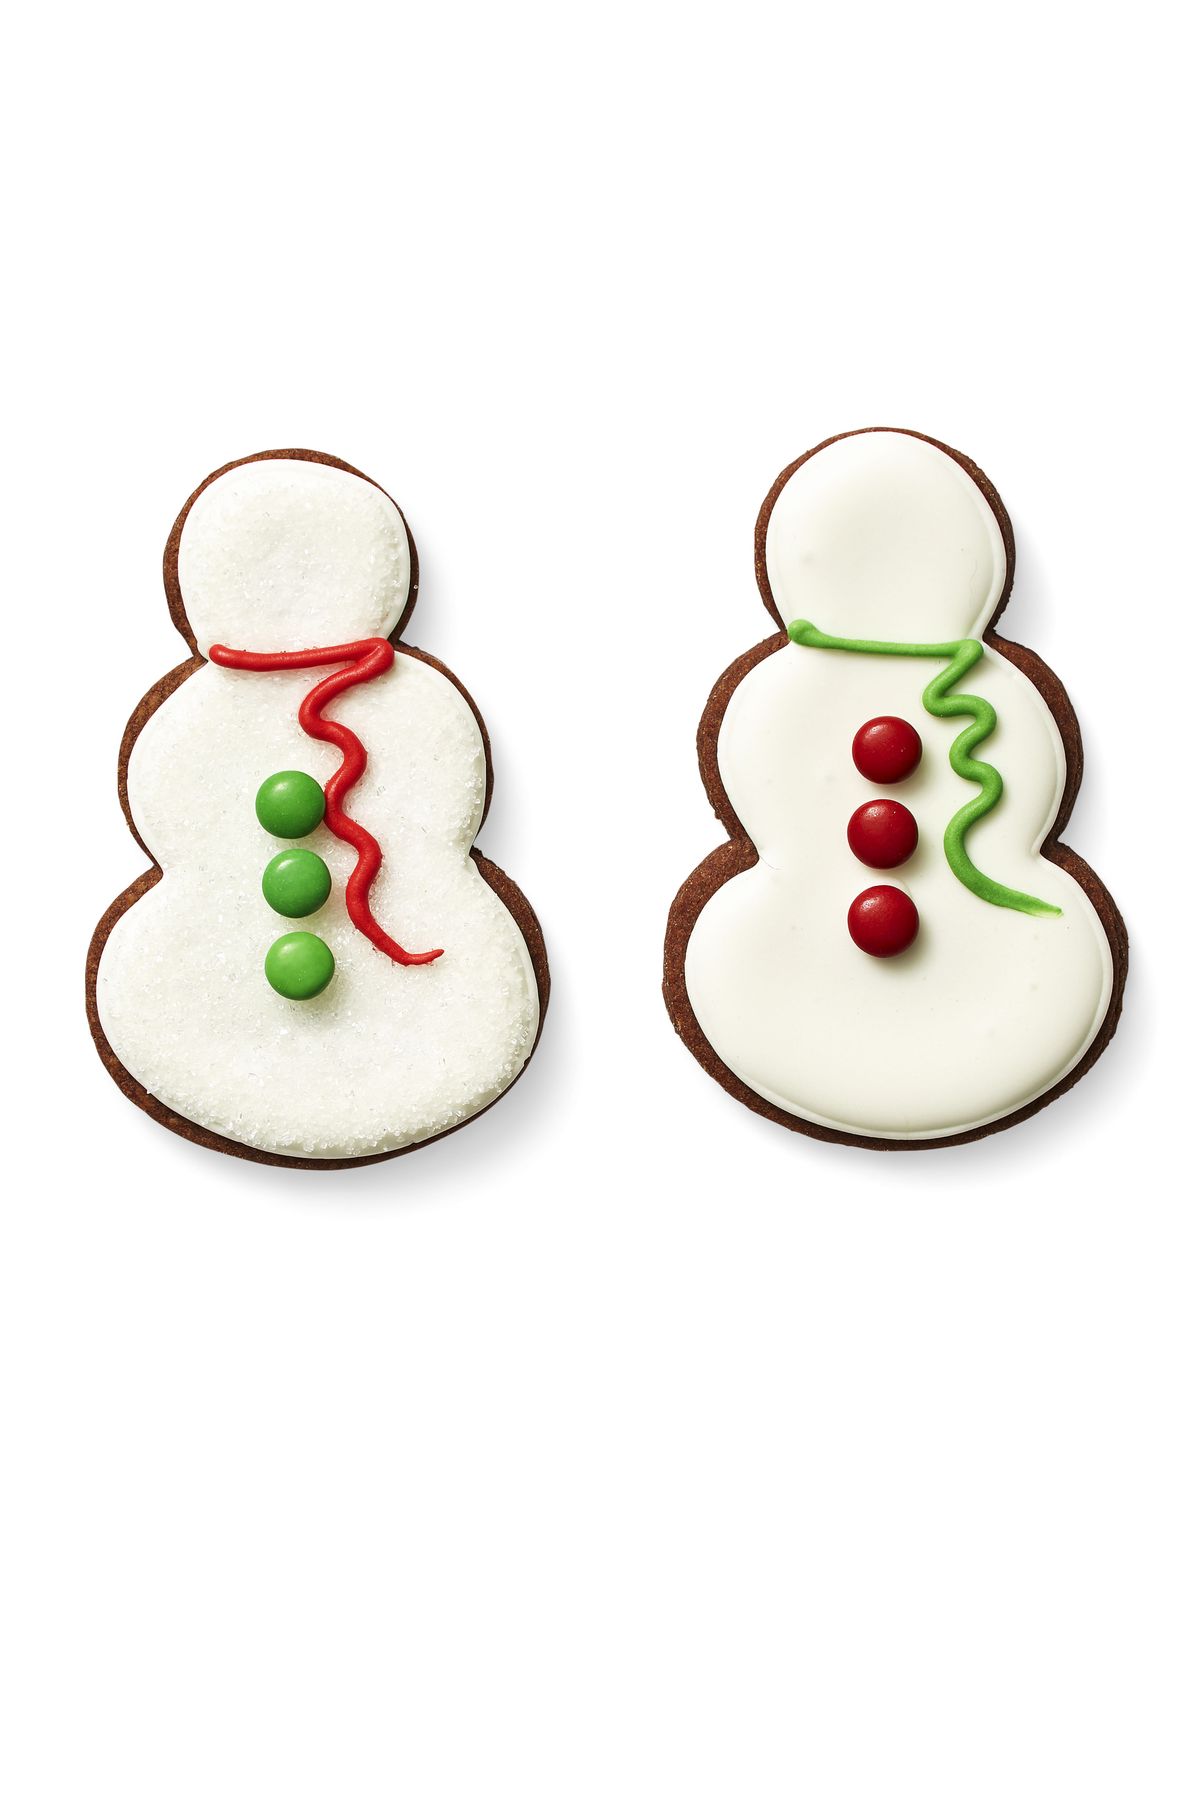 Frosted the Snowmen - Decorating Christmas Cookie Ideas